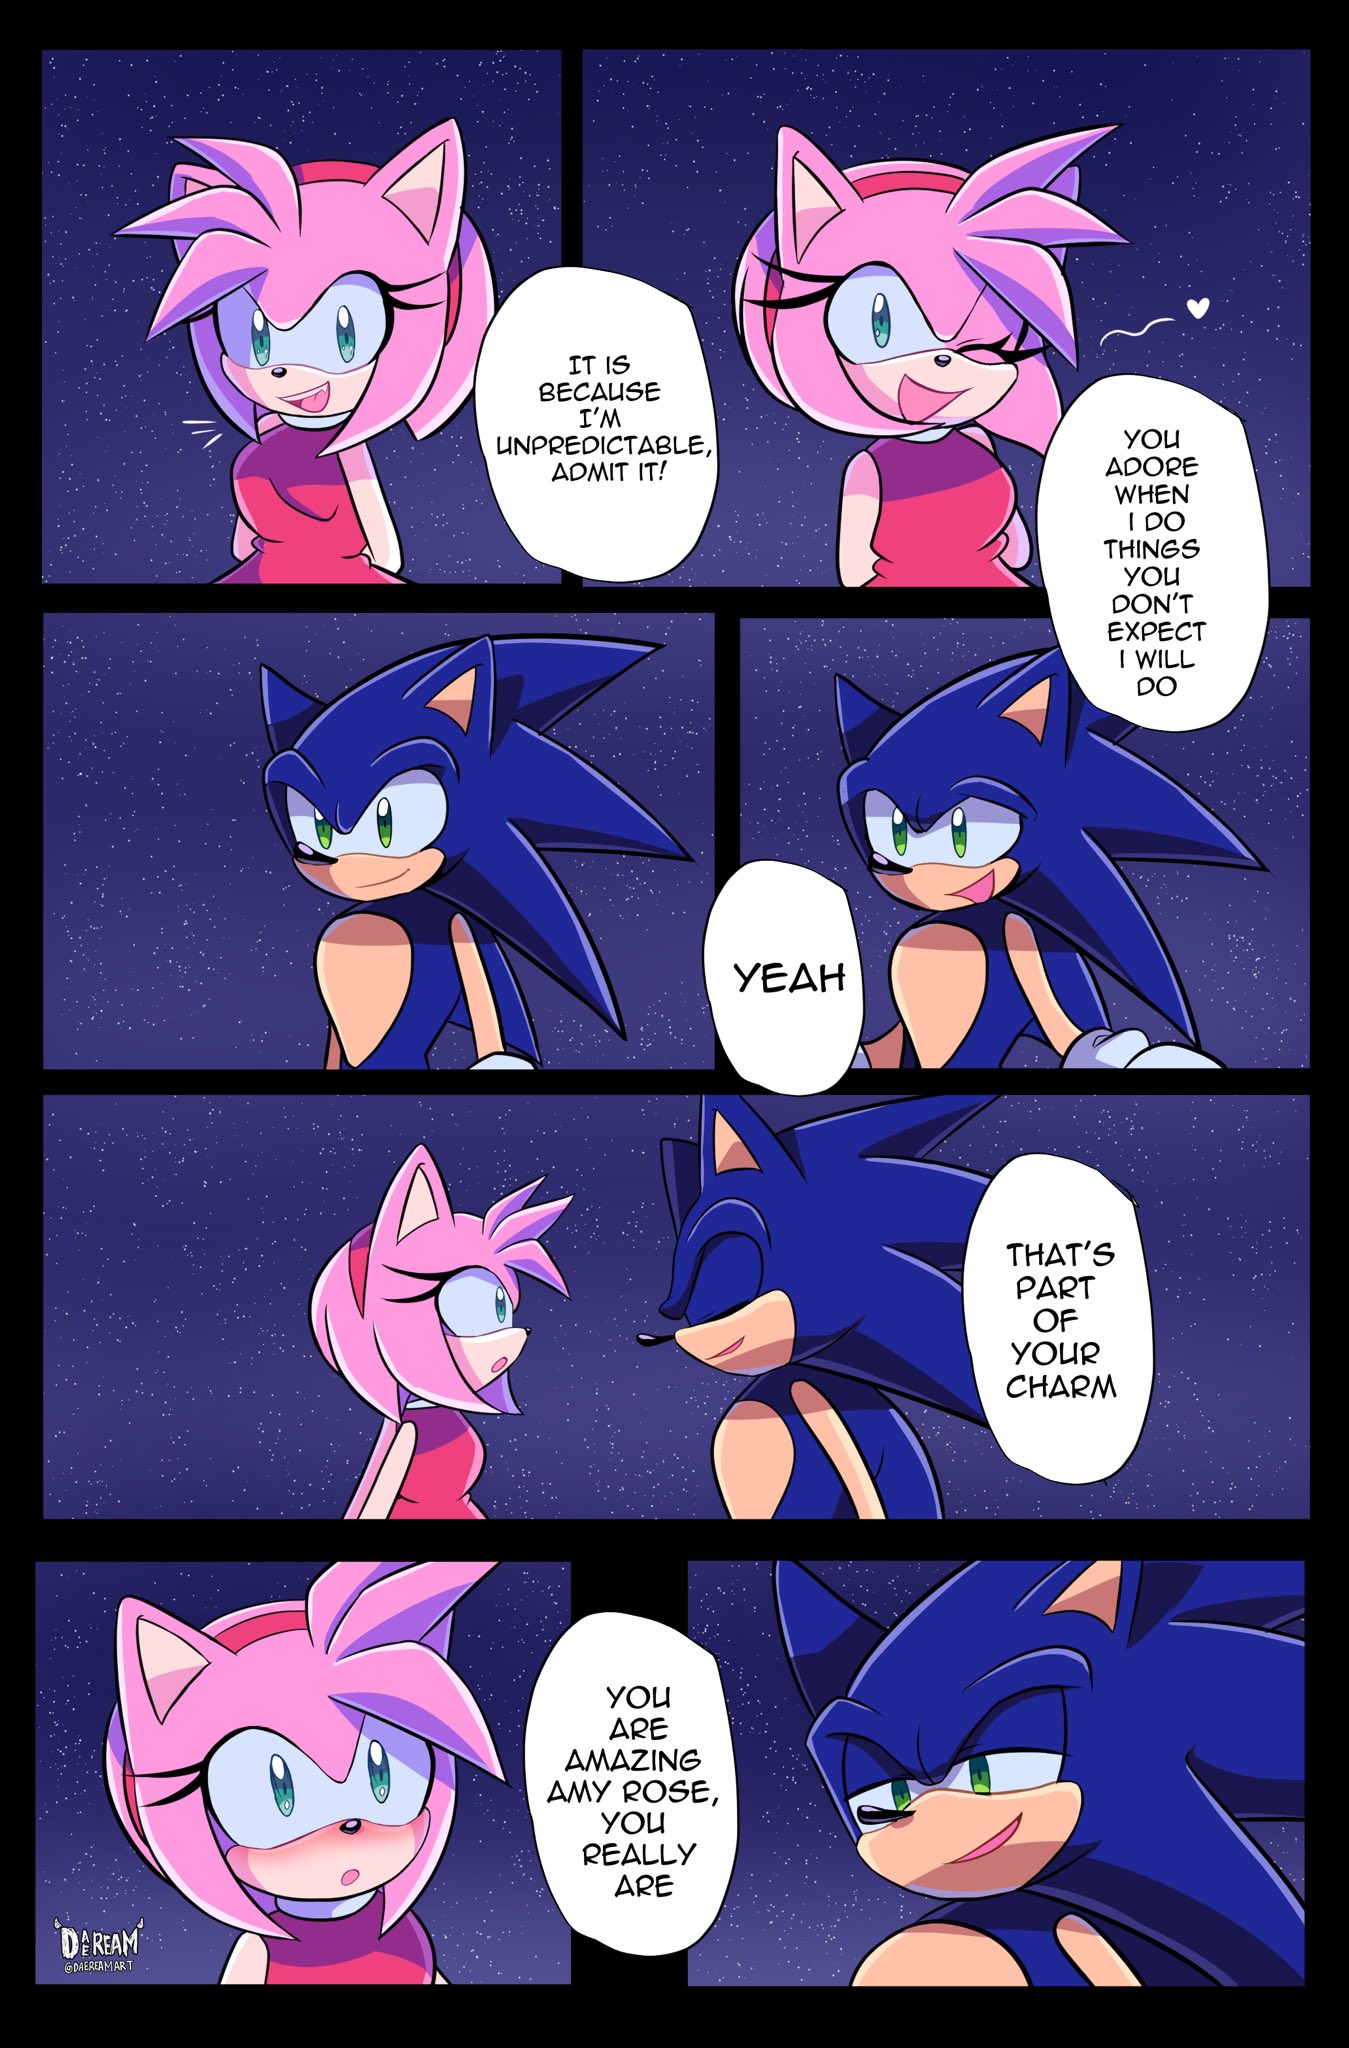 Daeream on X: First Part of my Sonamy Comic, 2k Special! There a